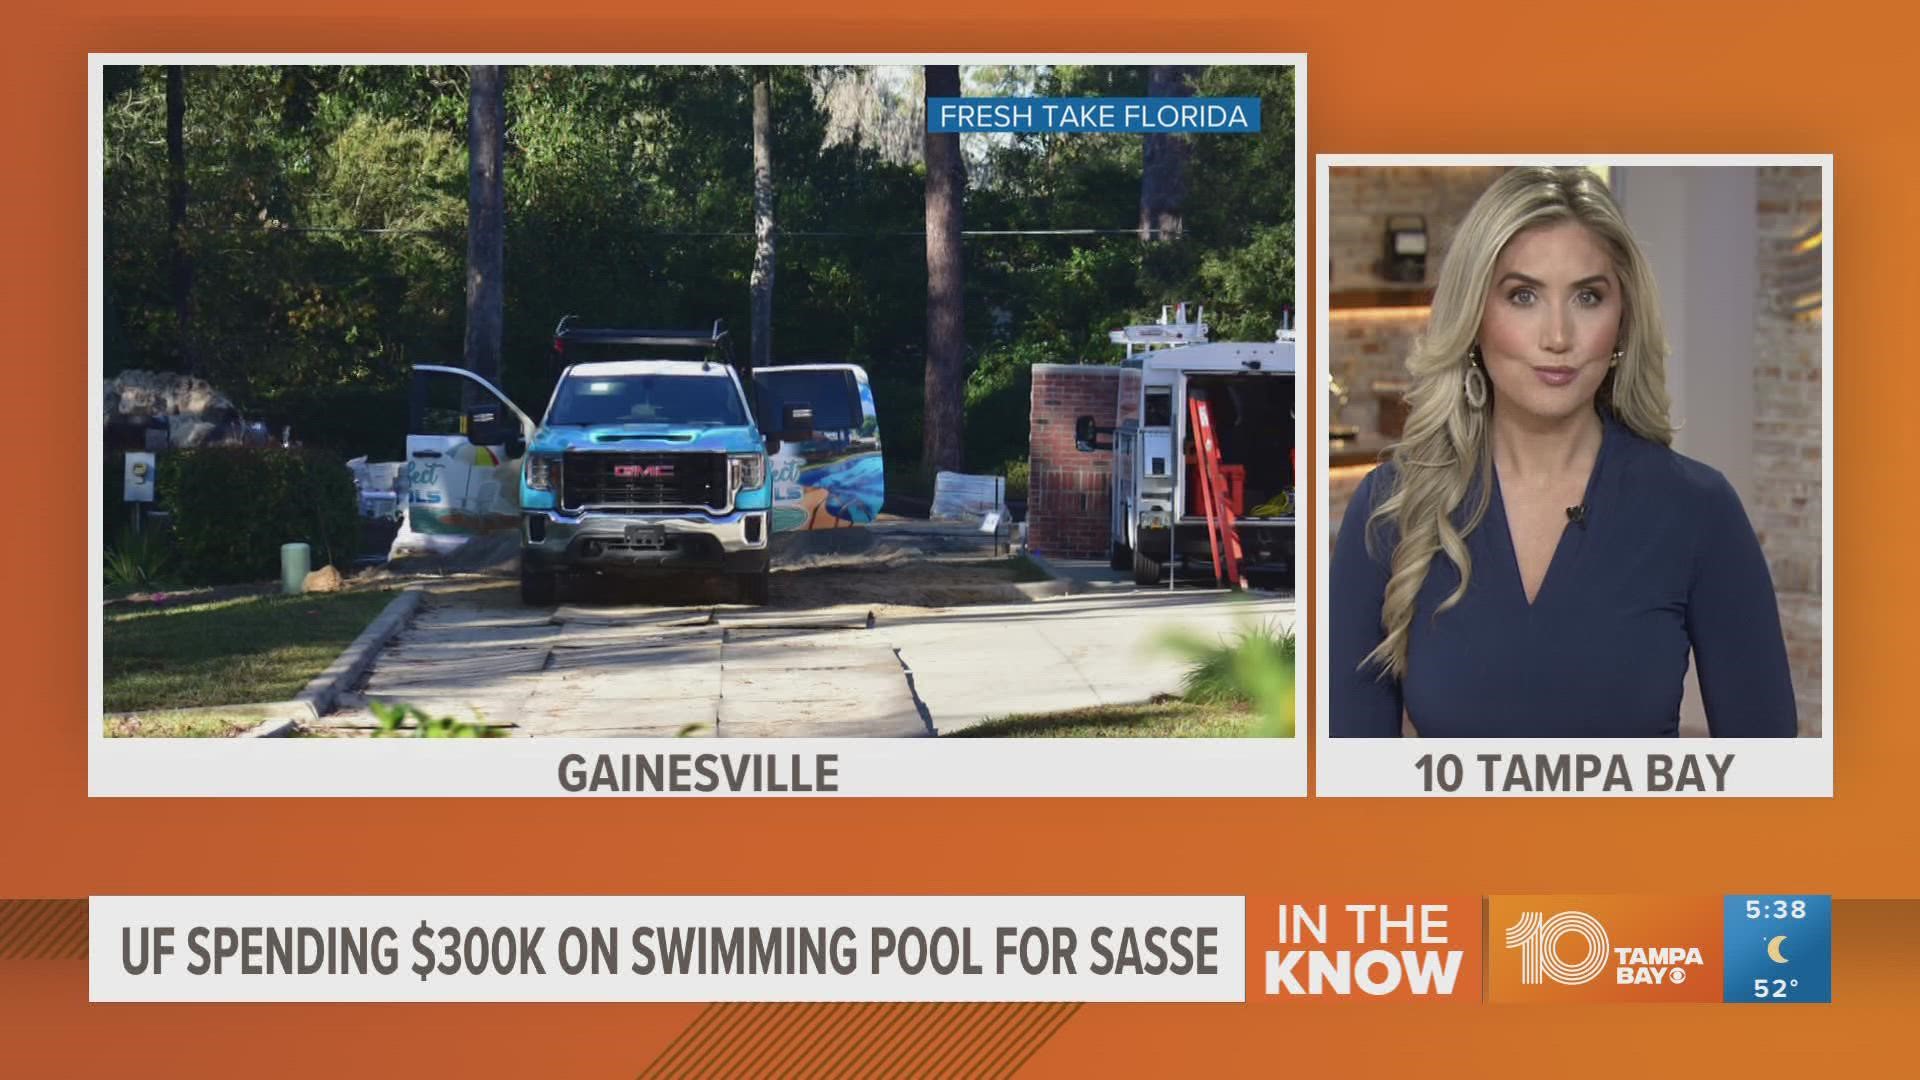 A university spokesman, Steve Orlando, said Sasse did not ask for the pool to be built and provided no input over its design.